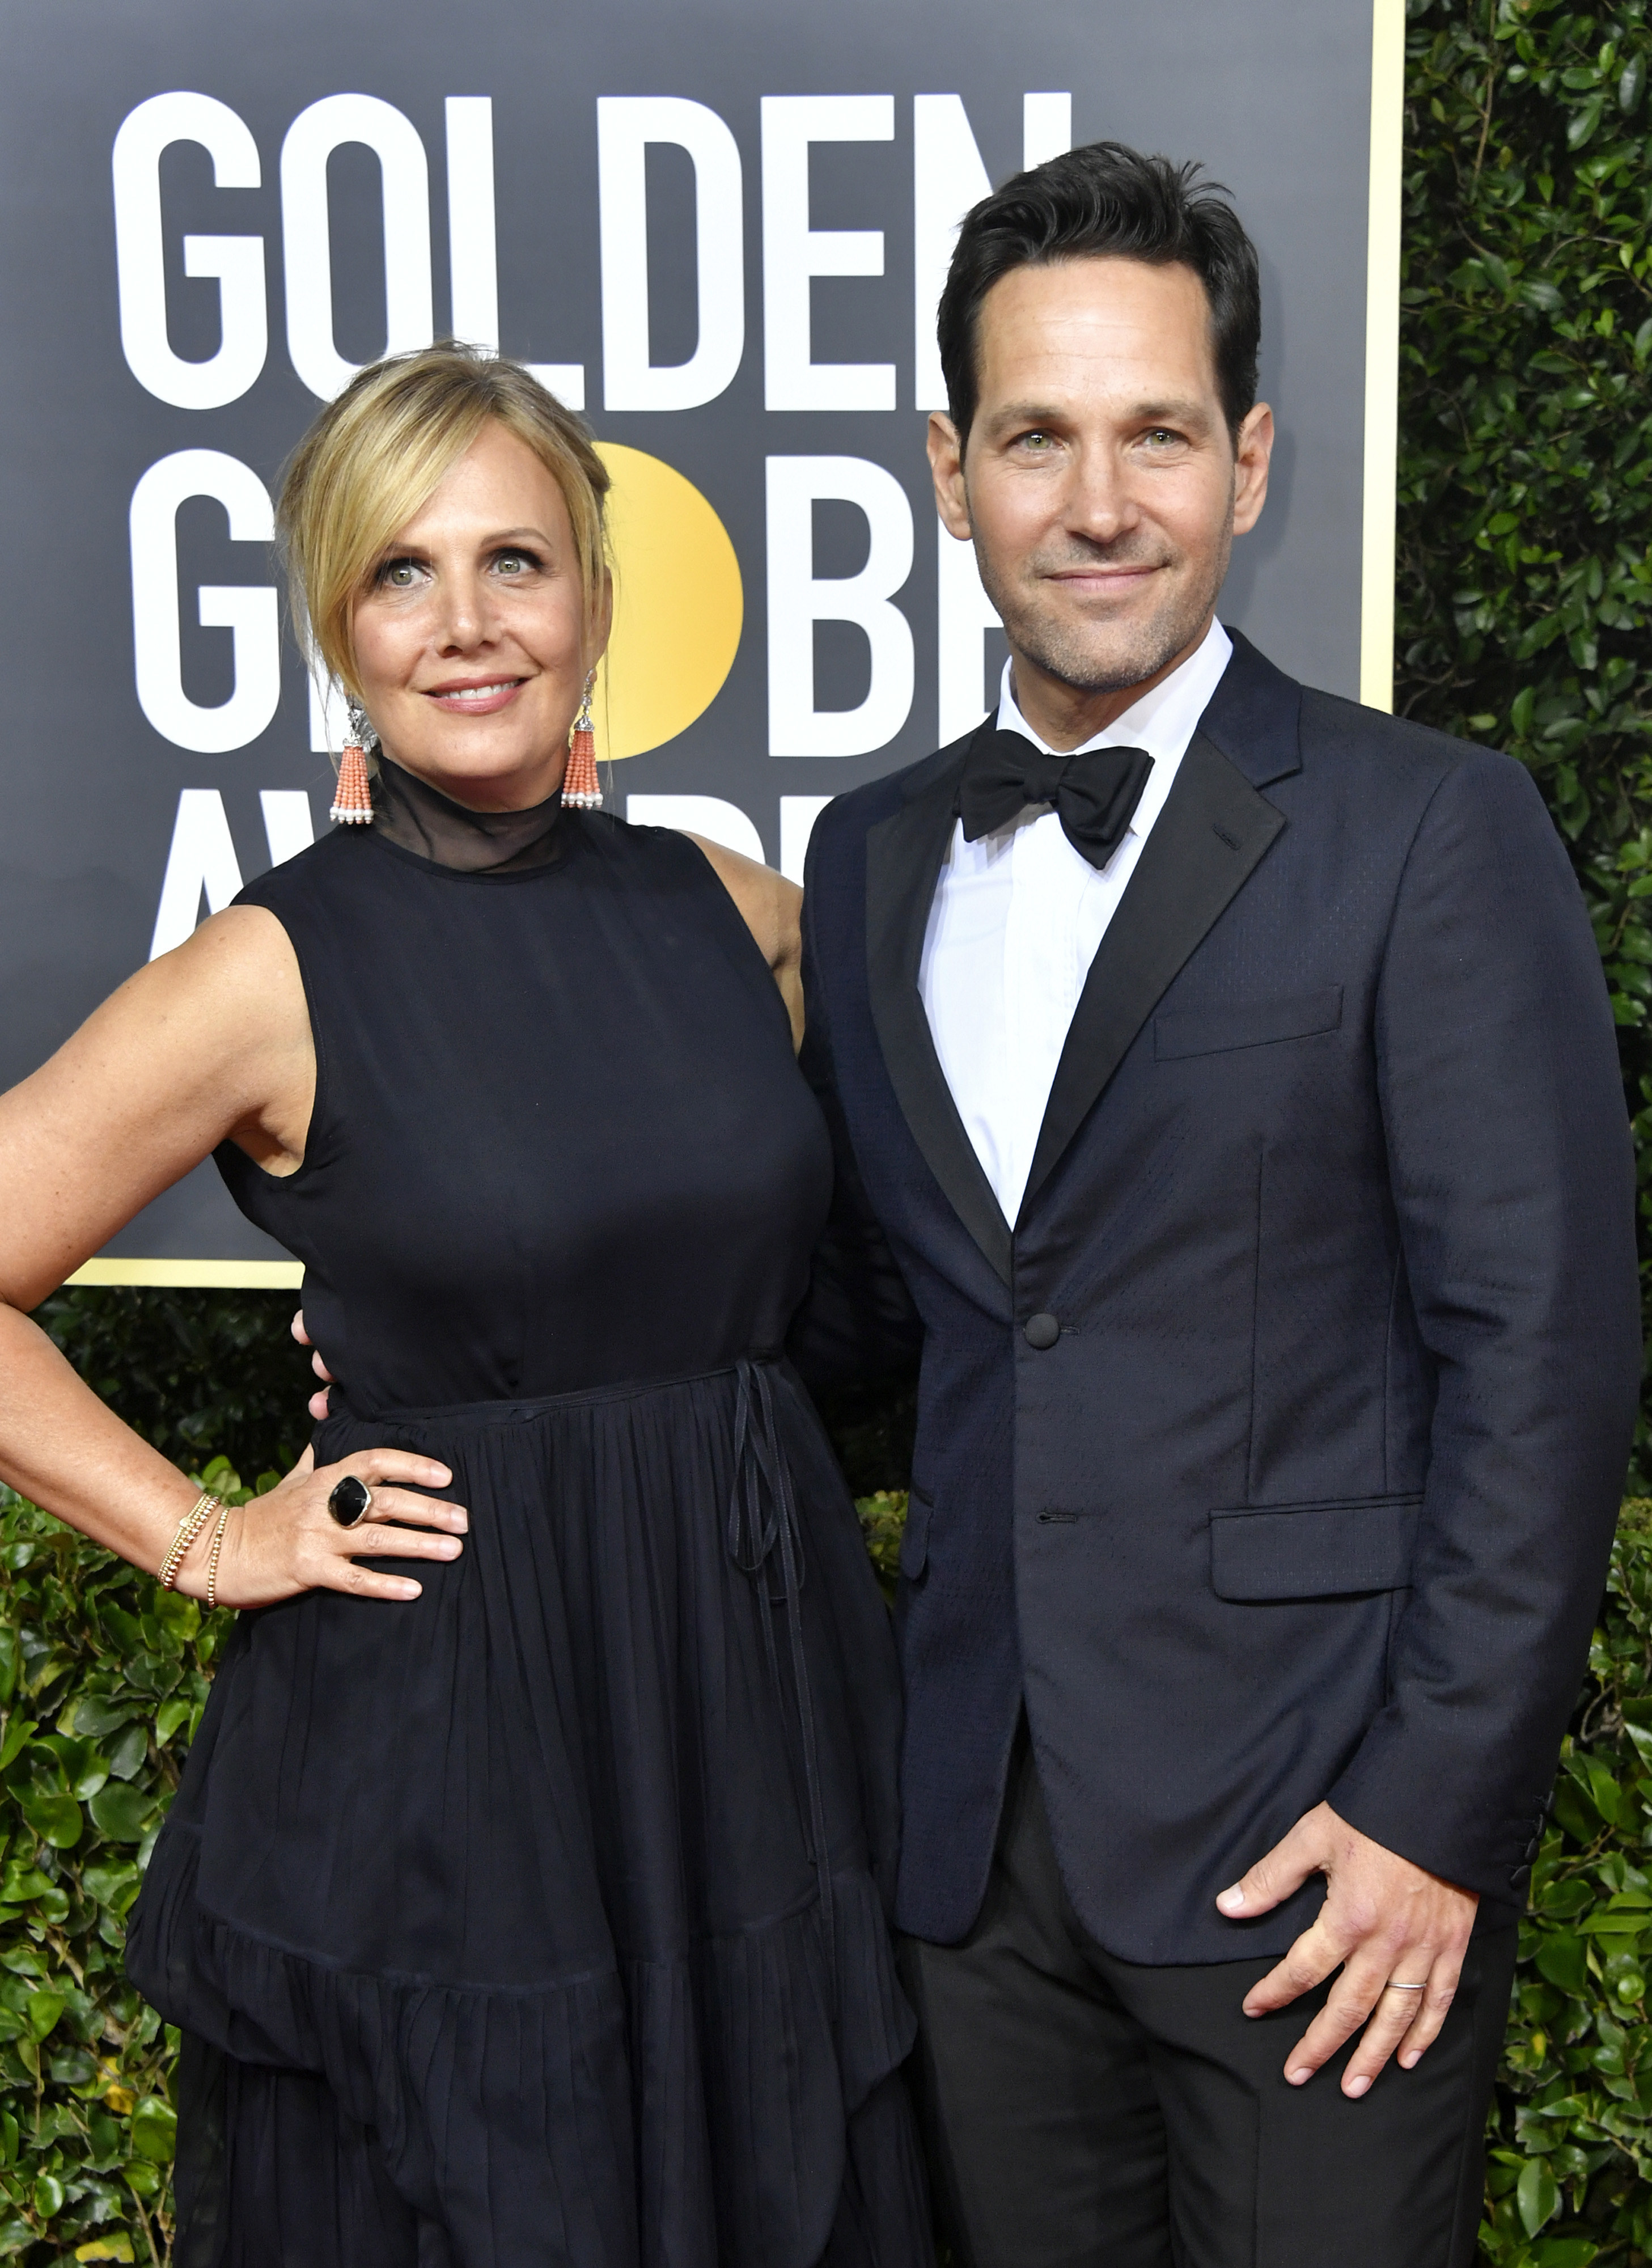 Julie Yaeger and Paul Rudd attend the 77th Annual Golden Globe Awards at The Beverly Hilton Hotel on January 05, 2020